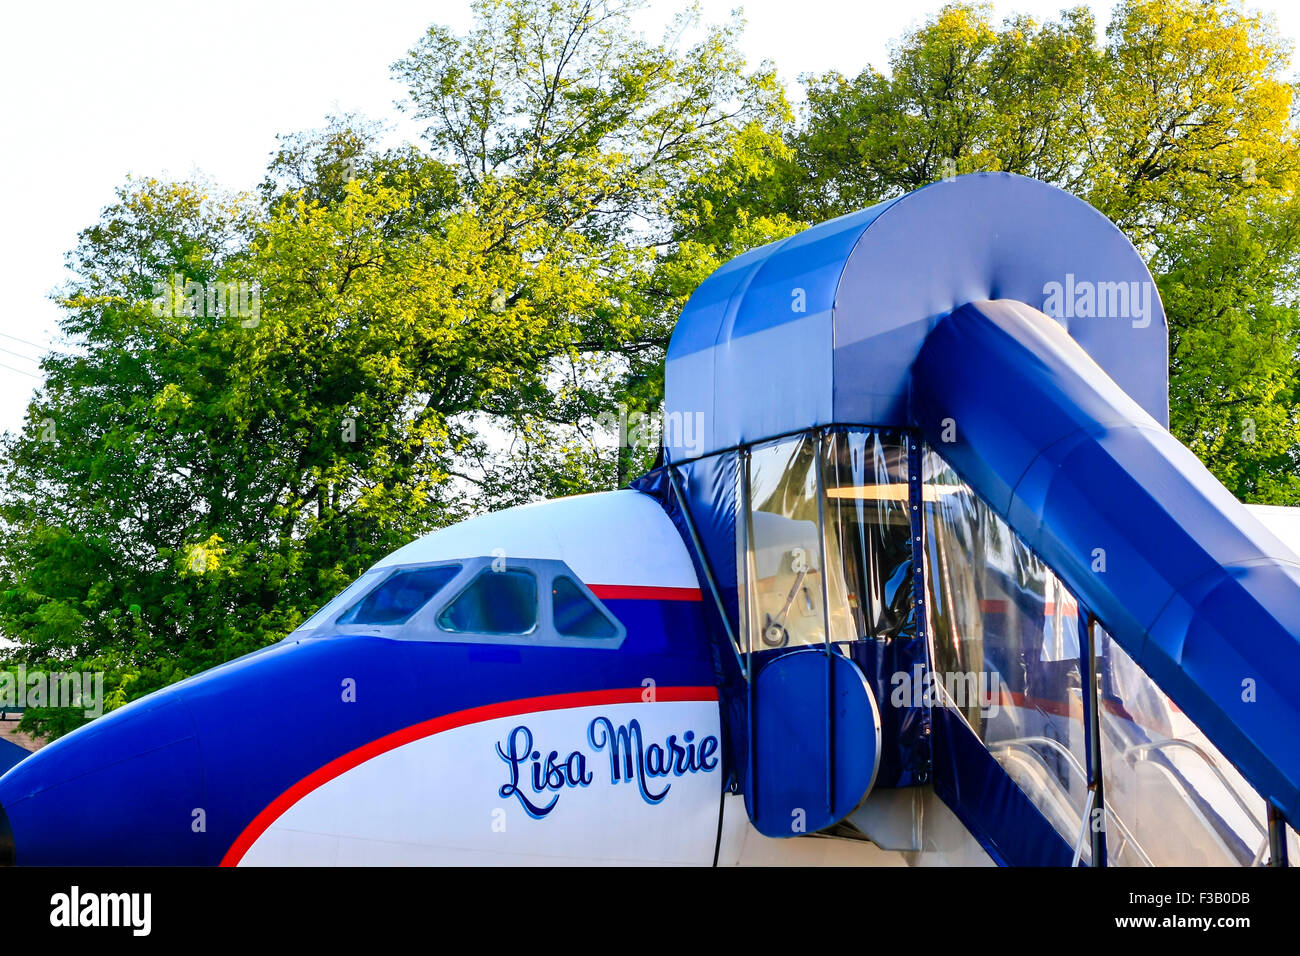 Entrance to Elvis's plane named after his daughter Lisa Marie, seen outside his museum in Memphis Tennessee Stock Photo